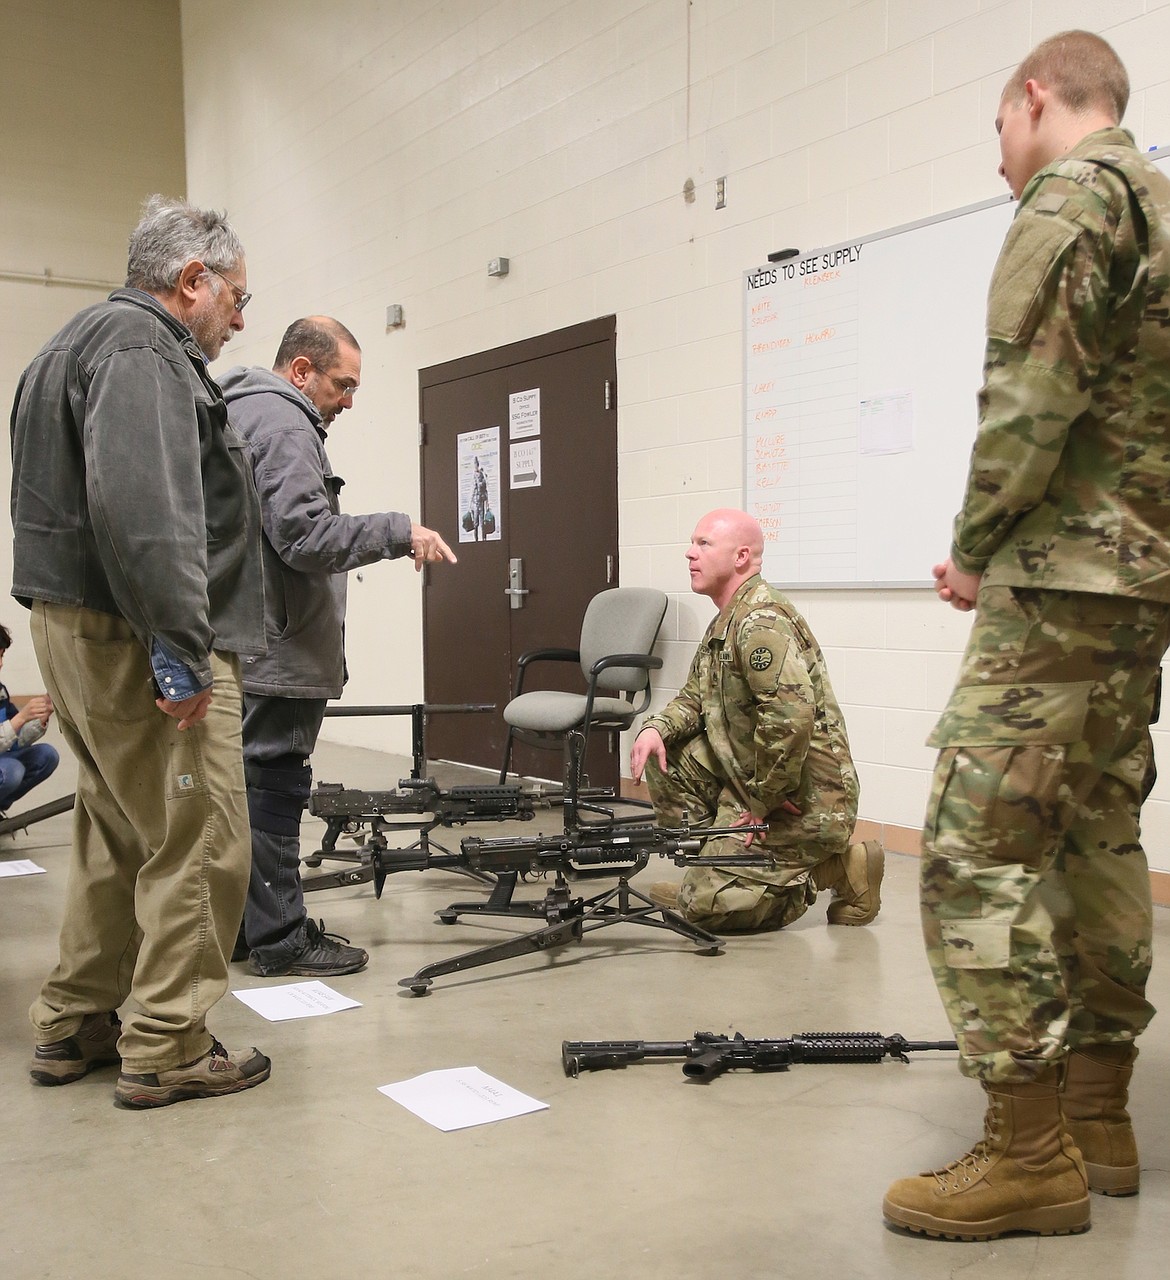 During an open house at the Idaho Army National Guard Armory in Post Falls Thursday, veterans Mark Glenn and Owen Mir discuss the Army&#146;s current weaponry with Staff Sgt. Nick Fowler of Coeur d&#146;Alene and Pvt. Ty Ward of Priest River. &#147;Everything&#146;s changed,&#148; said Mir. (Judd Wilson/PRESS)